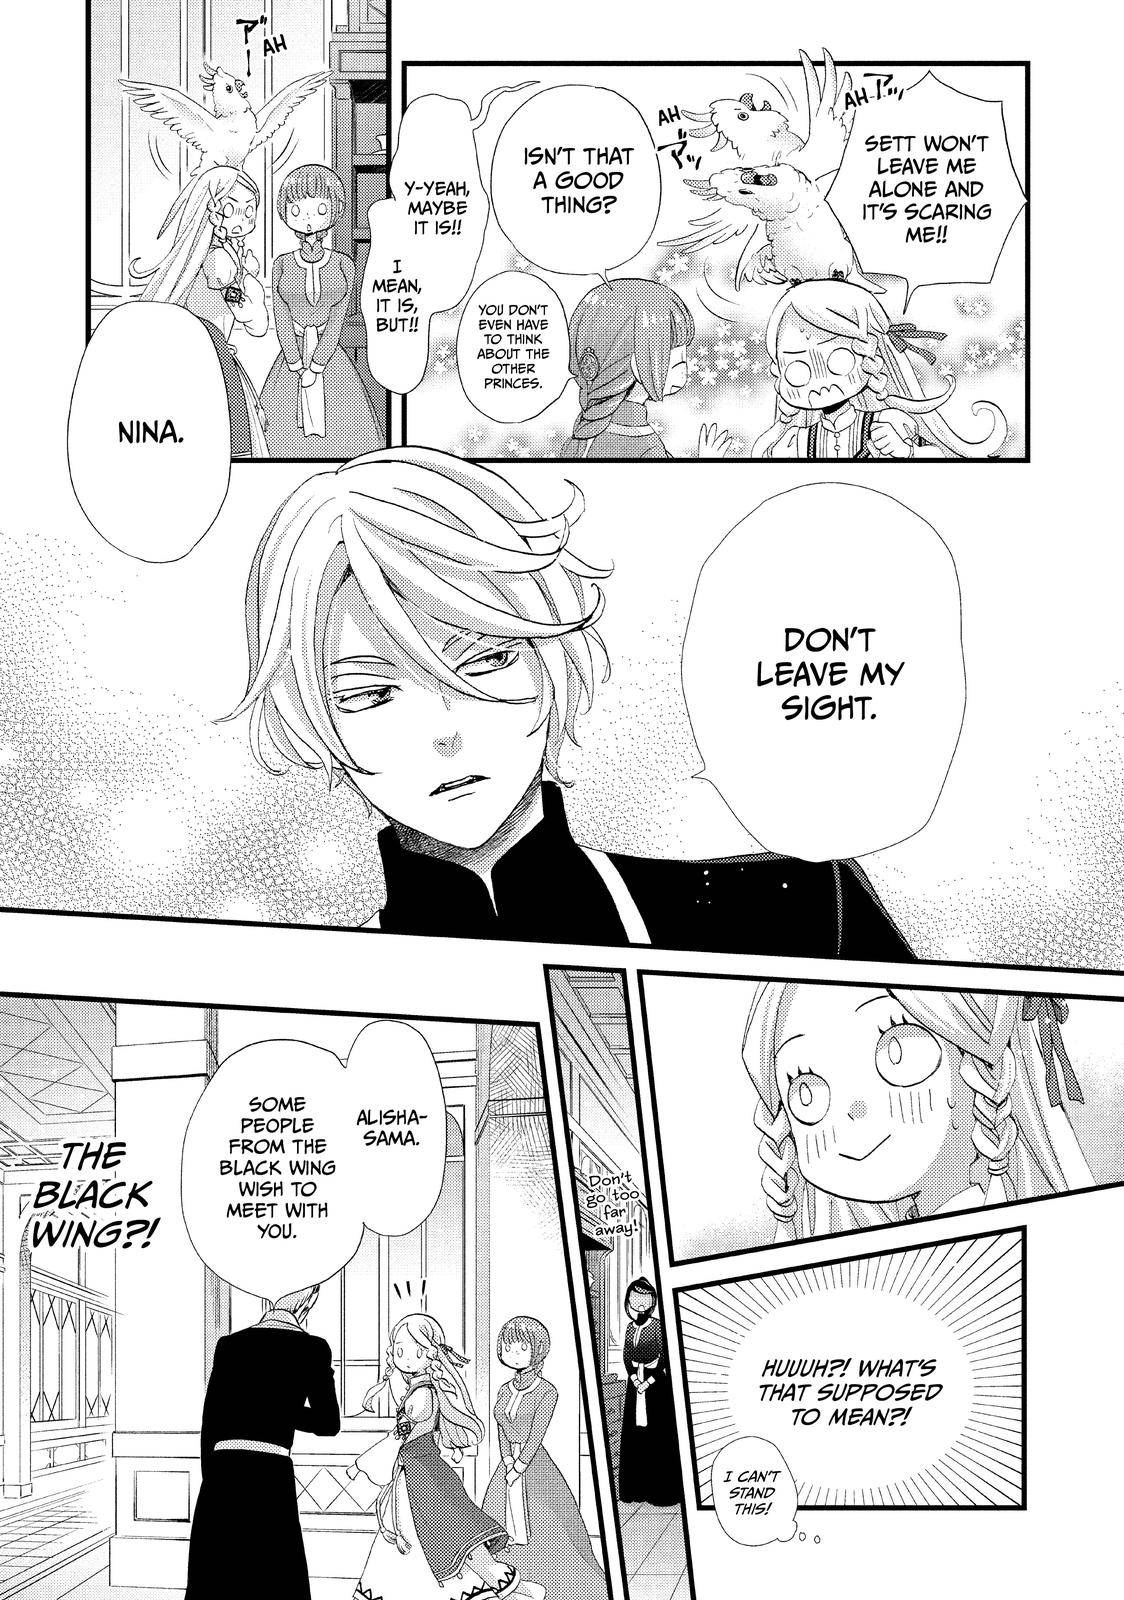 Nina the Starry Bride - chapter 16 - #5